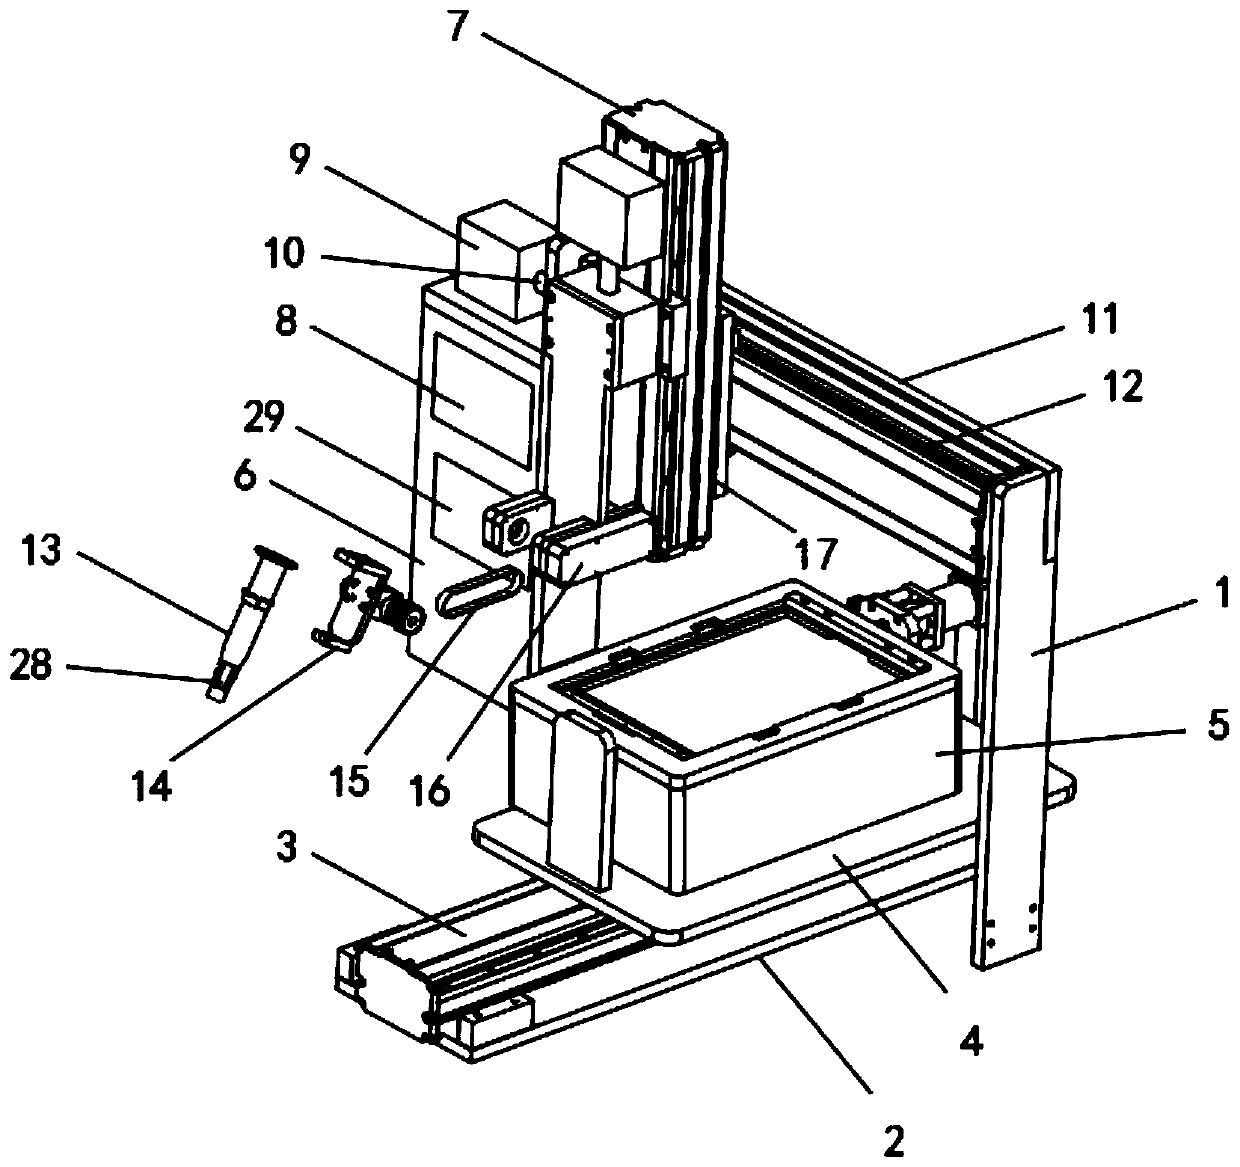 A power connection assembly used for assembling internal components of communication electronic instruments